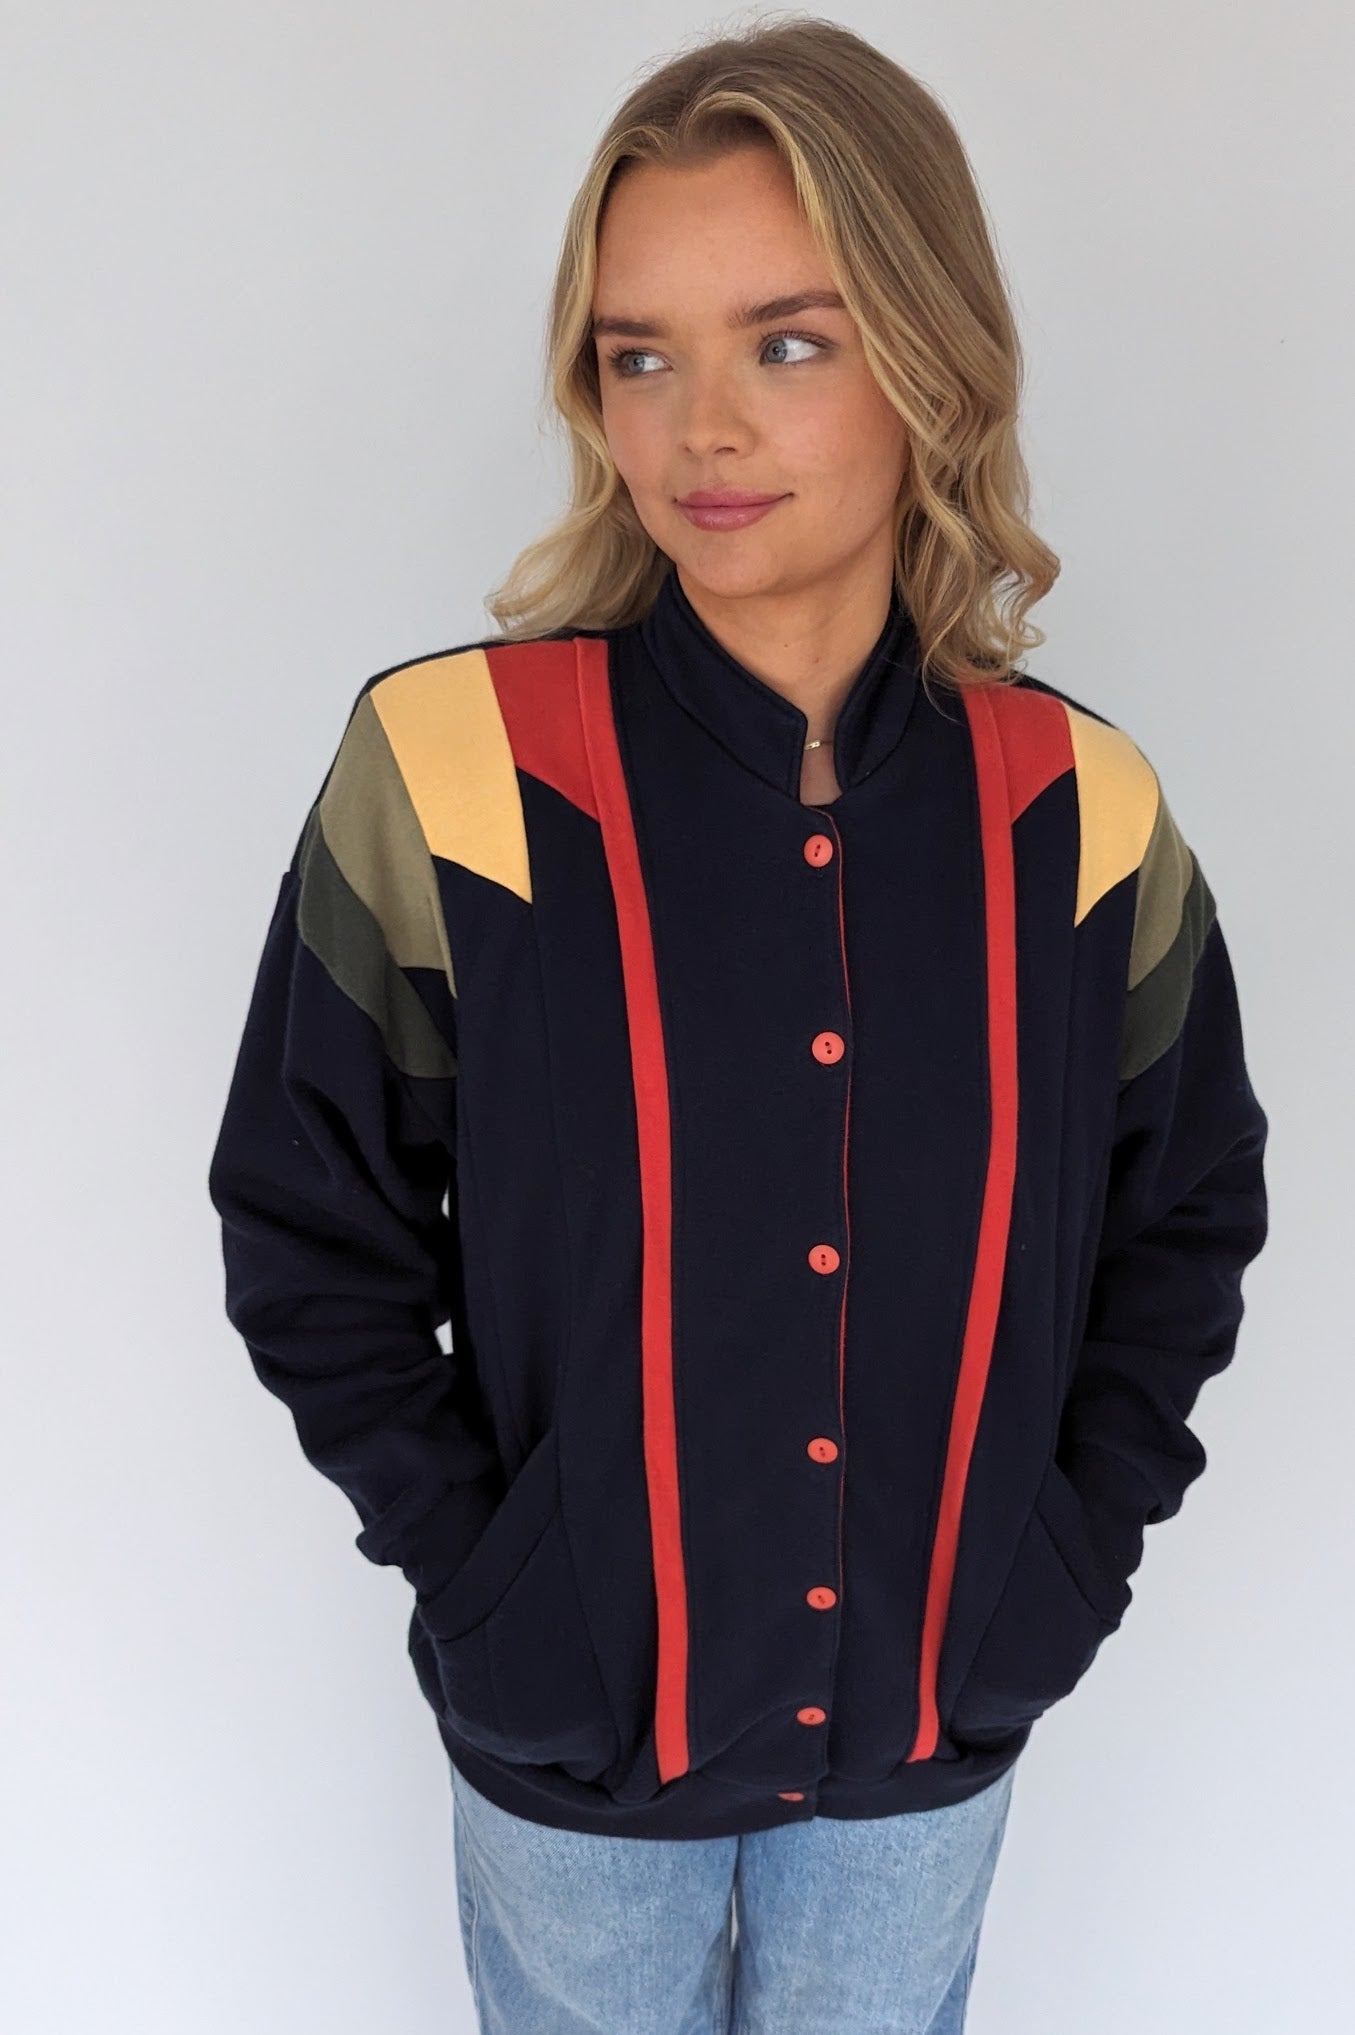 retro jersey cardigan in blue with red, yellow and green panelling done up with red buttons and pockets